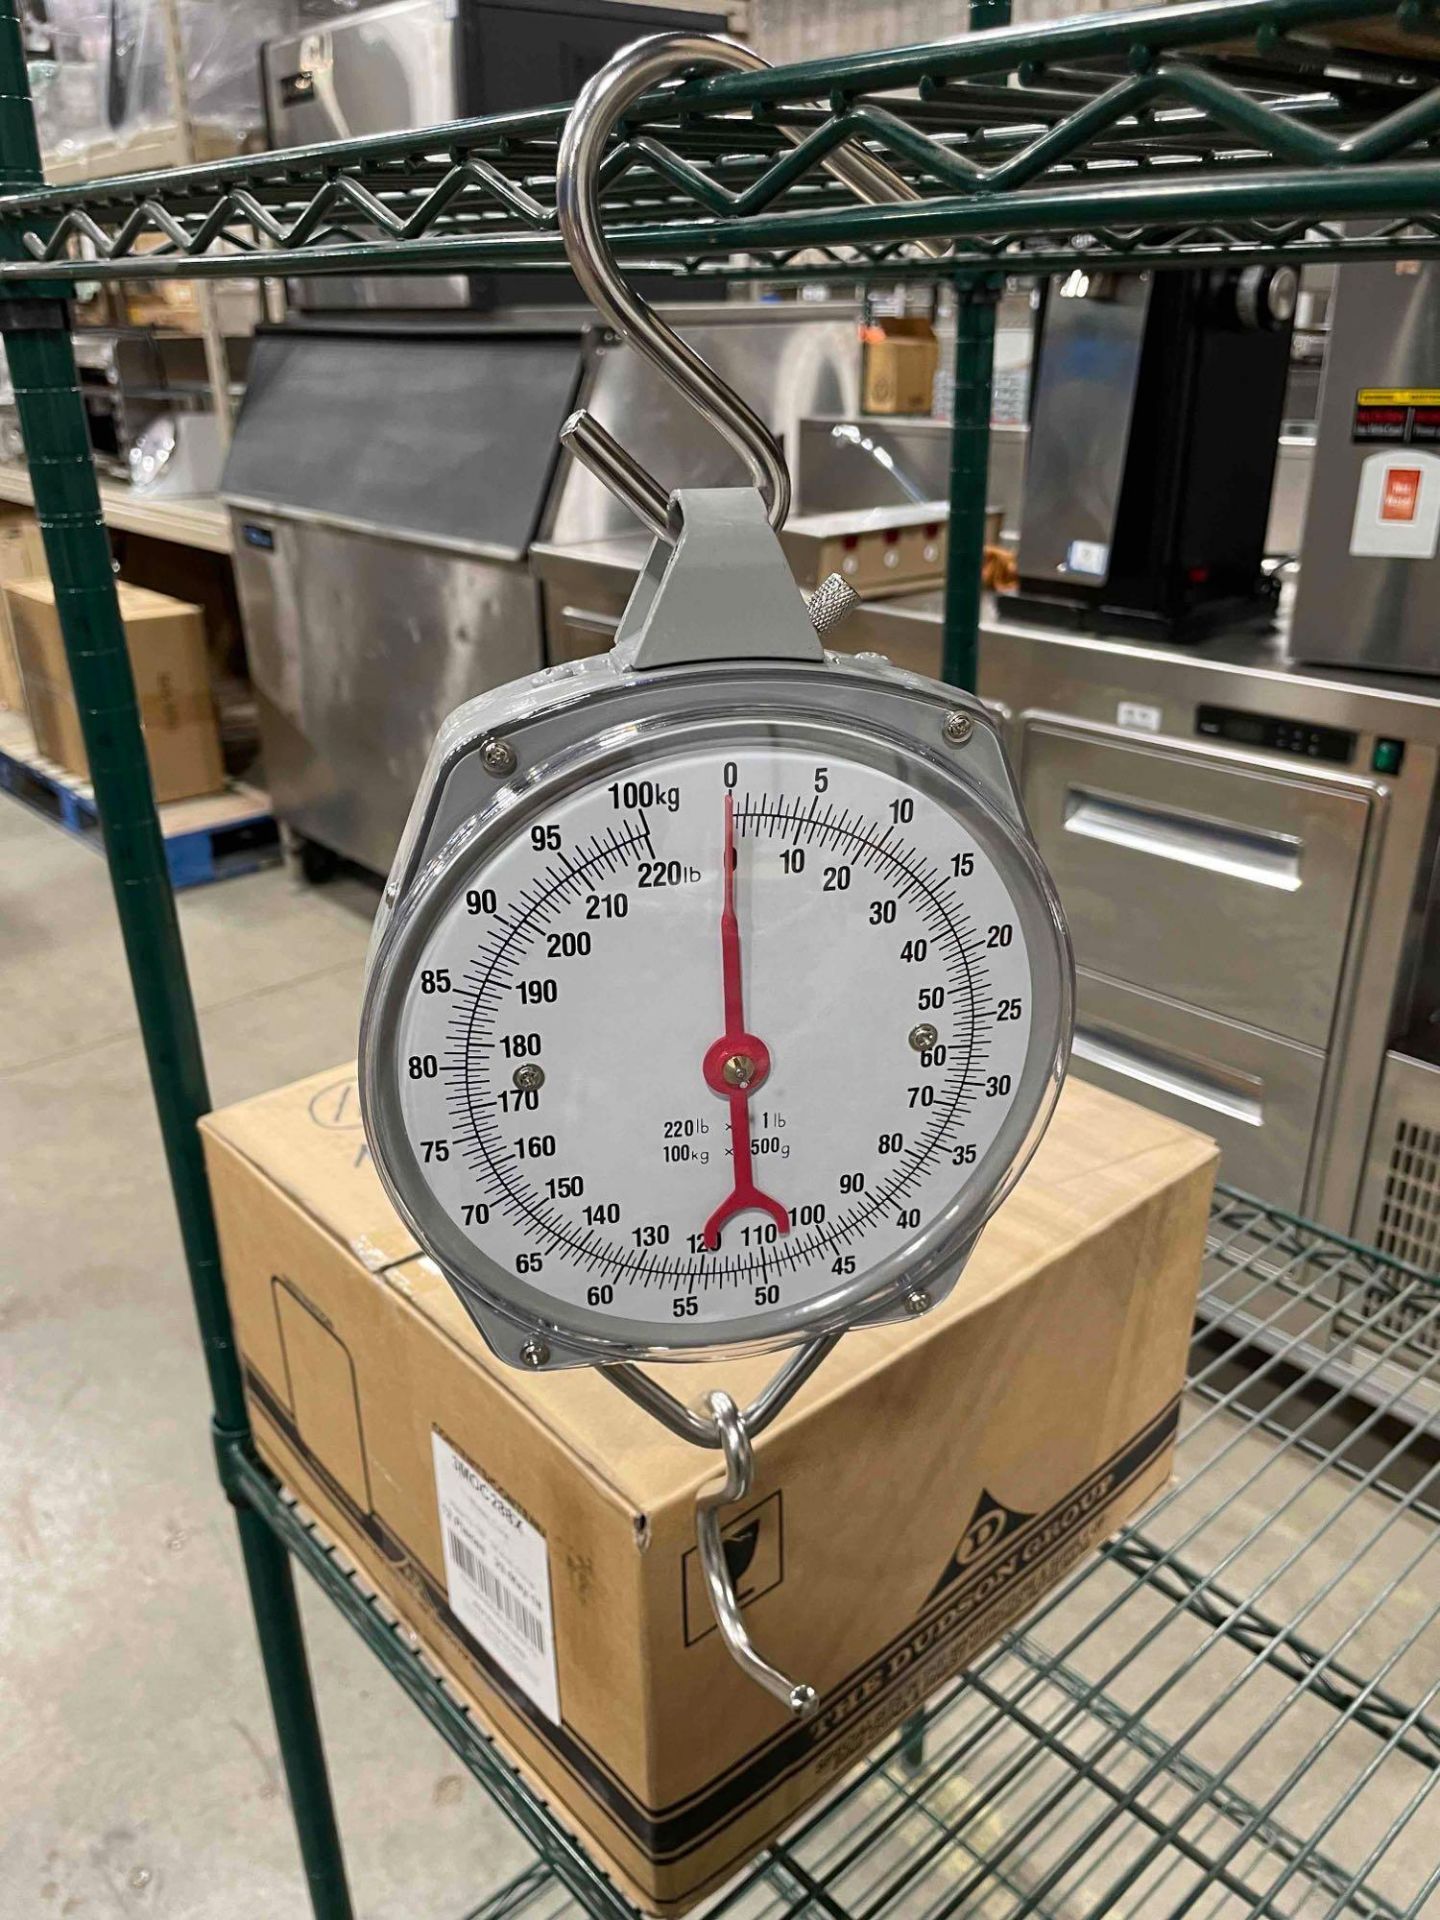 (2) NEW HANGING DIAL SCALE - 100 KG - NEW - Image 2 of 4